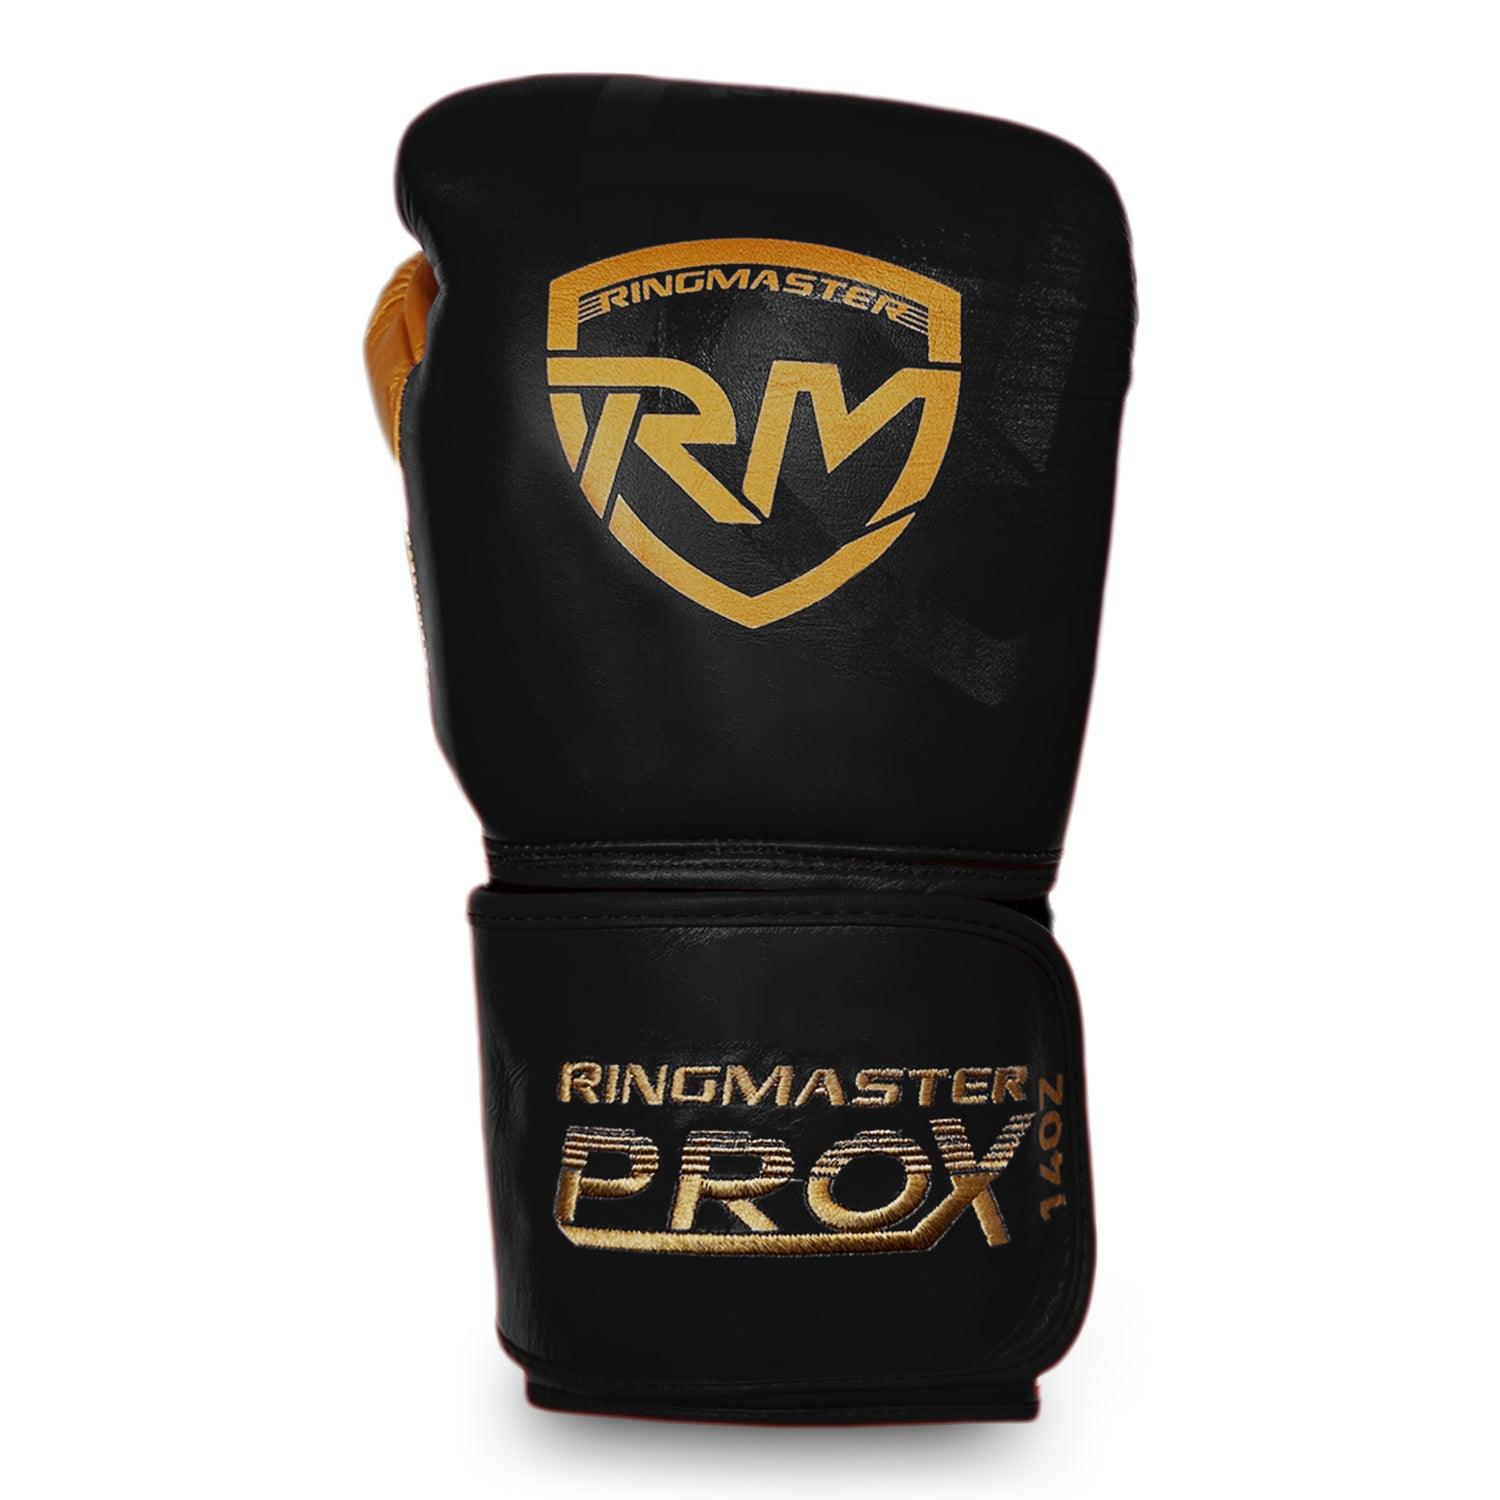 Shop Boxing Pads & Mitts  Punching/Focus Pads - Ringmaster Sports  Equipment – RINGMASTER SPORTS - Made For Champions